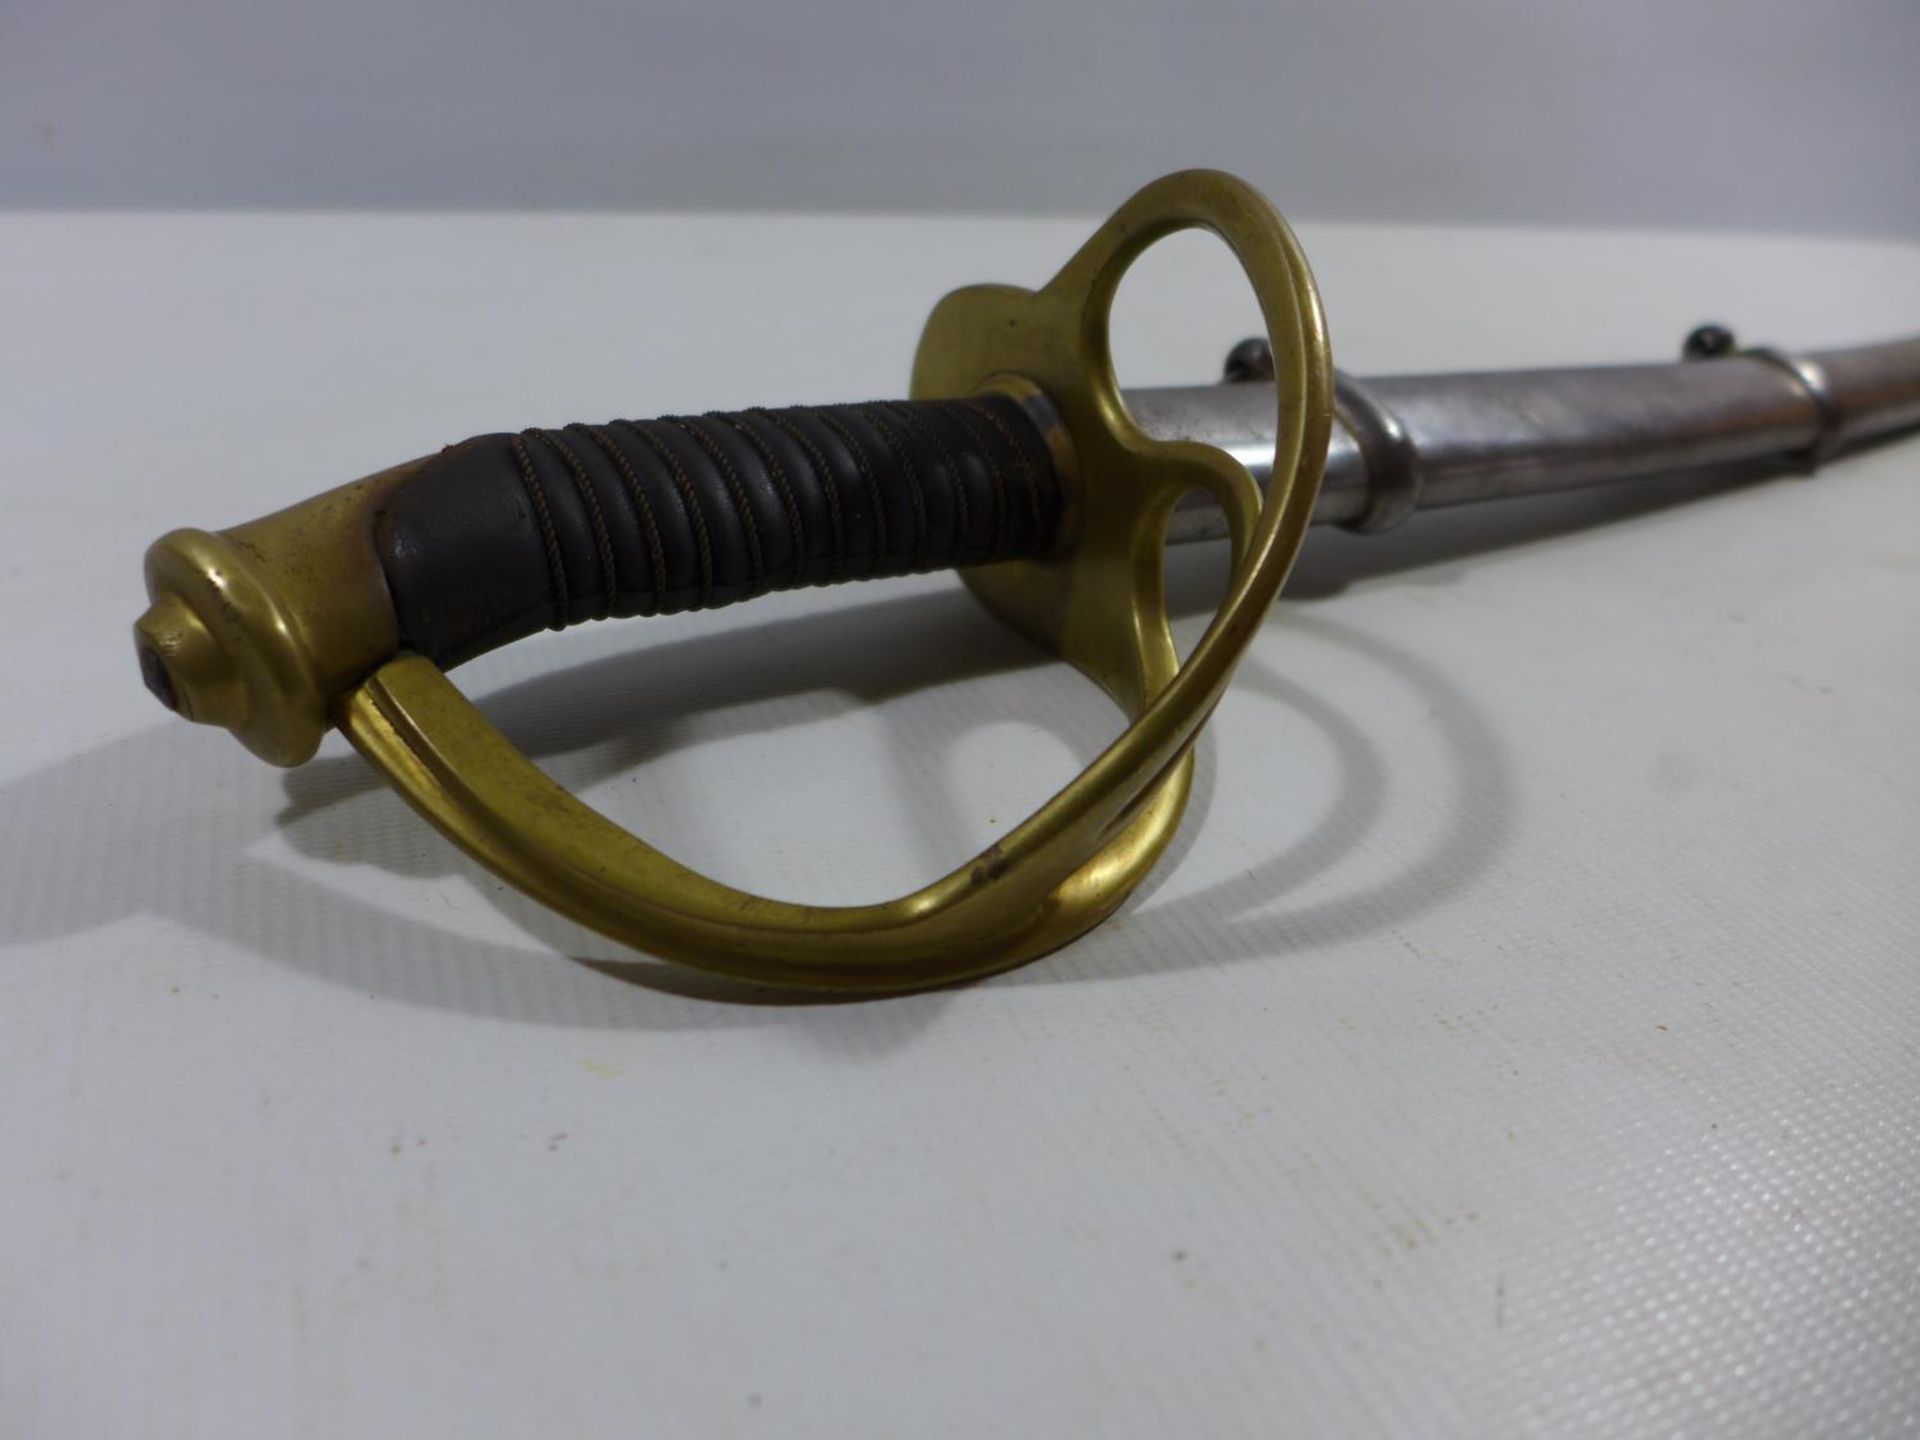 A CAVALRY SWORD AND SCABBARD OF UNKNOWN AGE, 87CM BLADE, PIERCED BRASS GUARD - Image 6 of 6